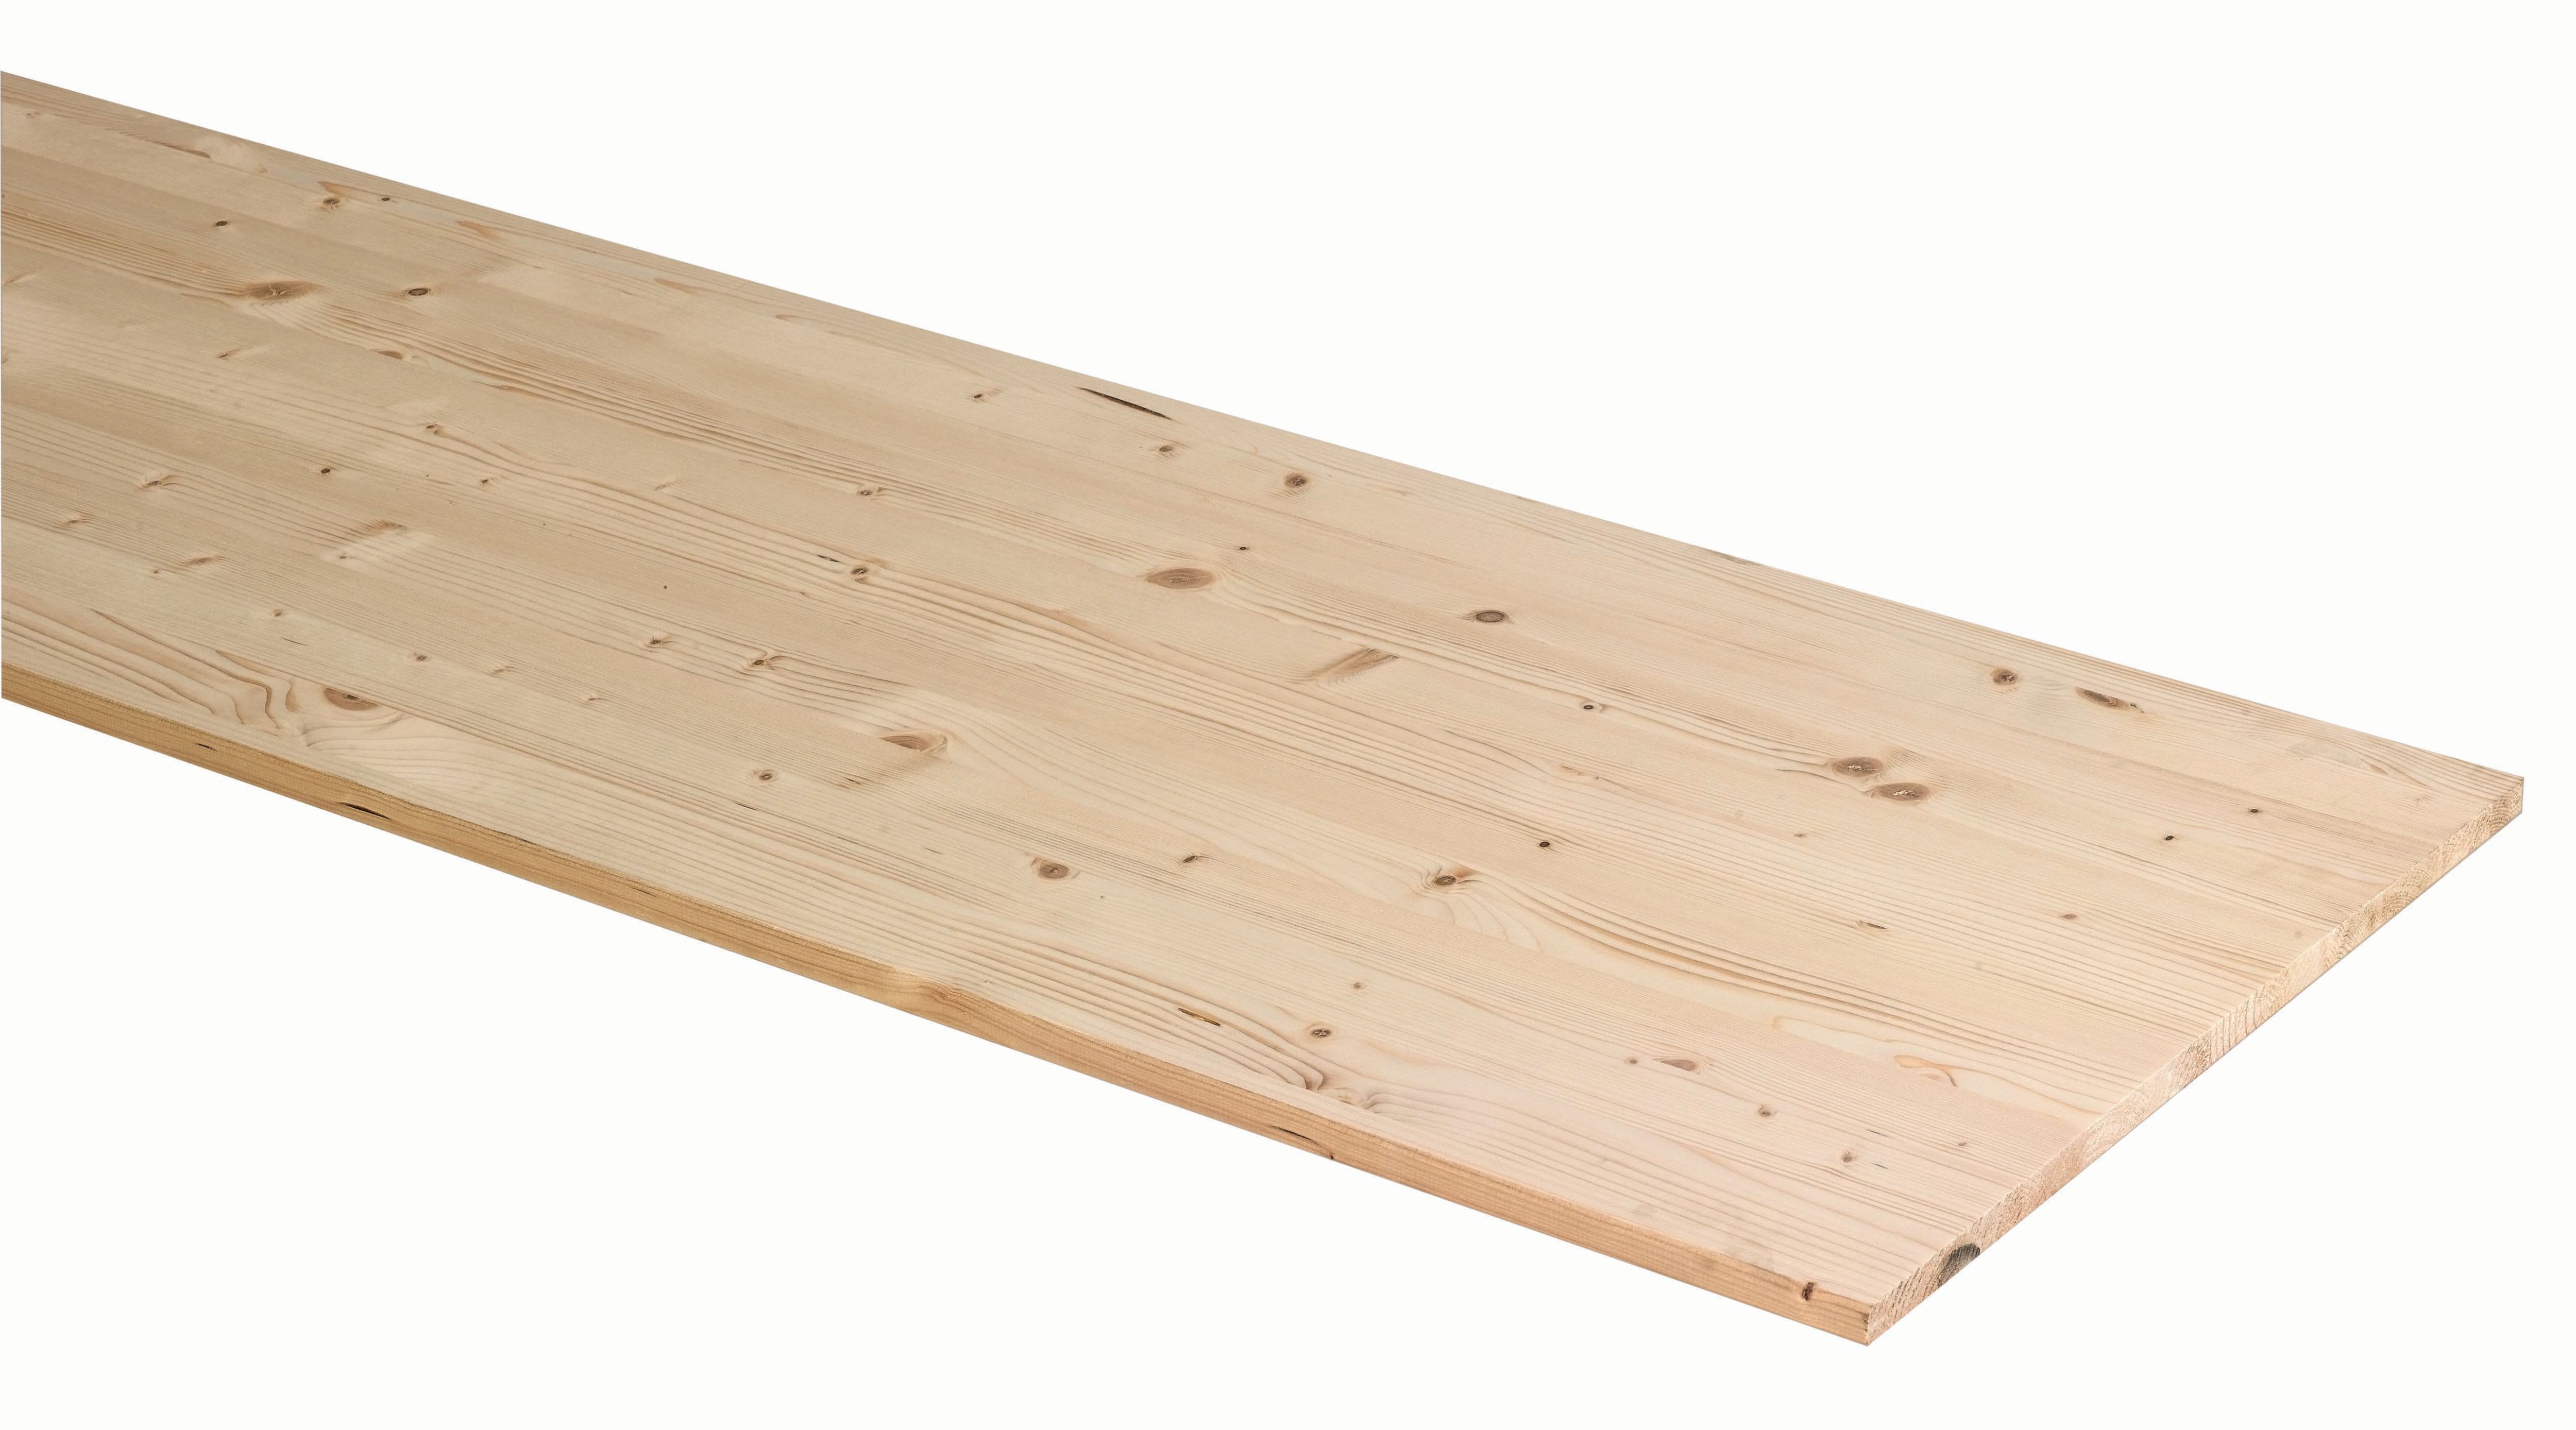 Wickes General Purpose Spruce Timberboard - 28mm x